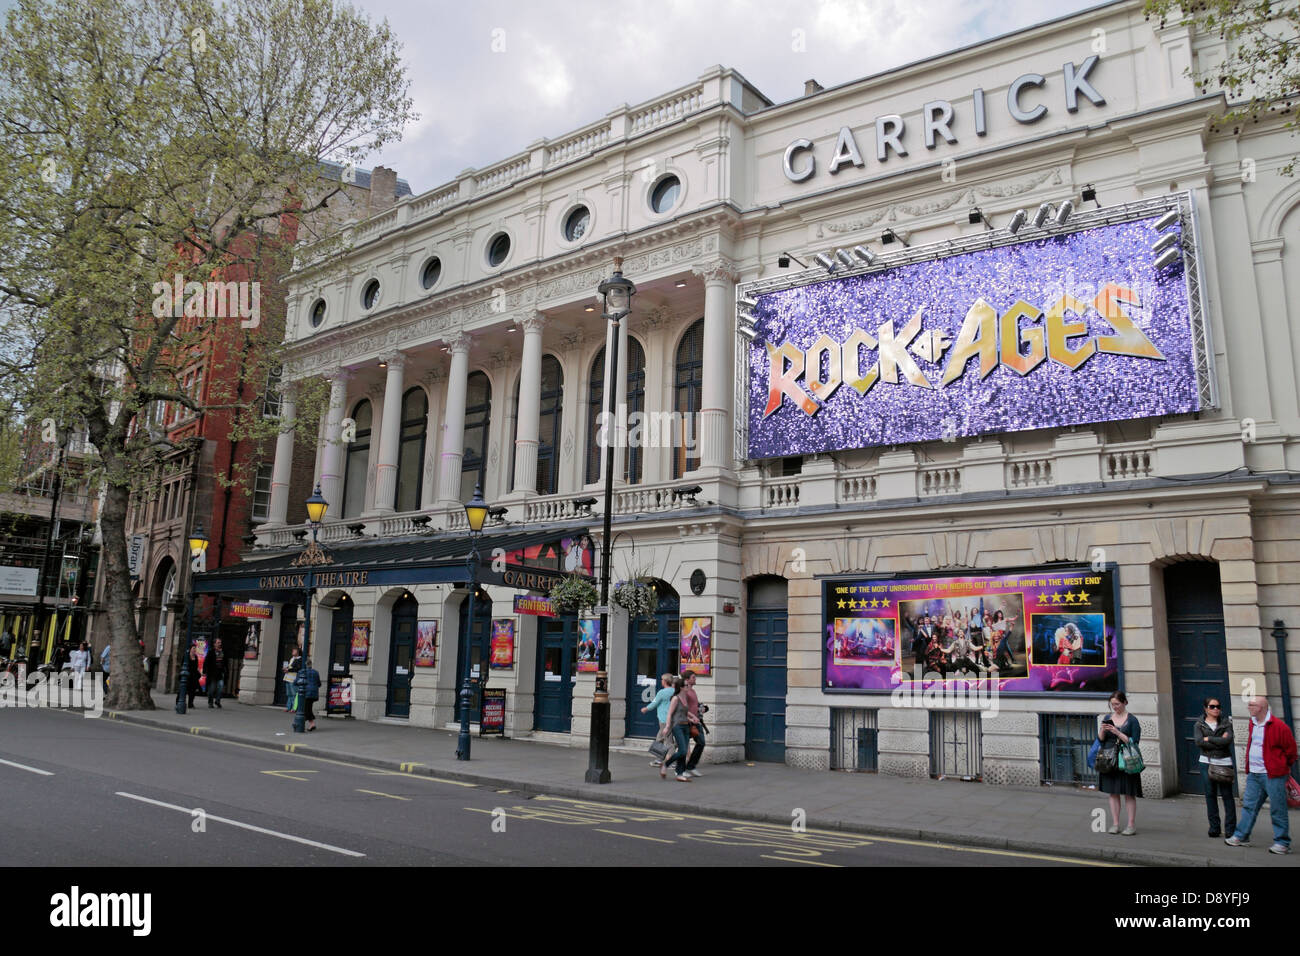 'Rock of Ages' at the Garrick Theatre, Charing Cross Road, Westminster, London, UK. May 2013 Stock Photo